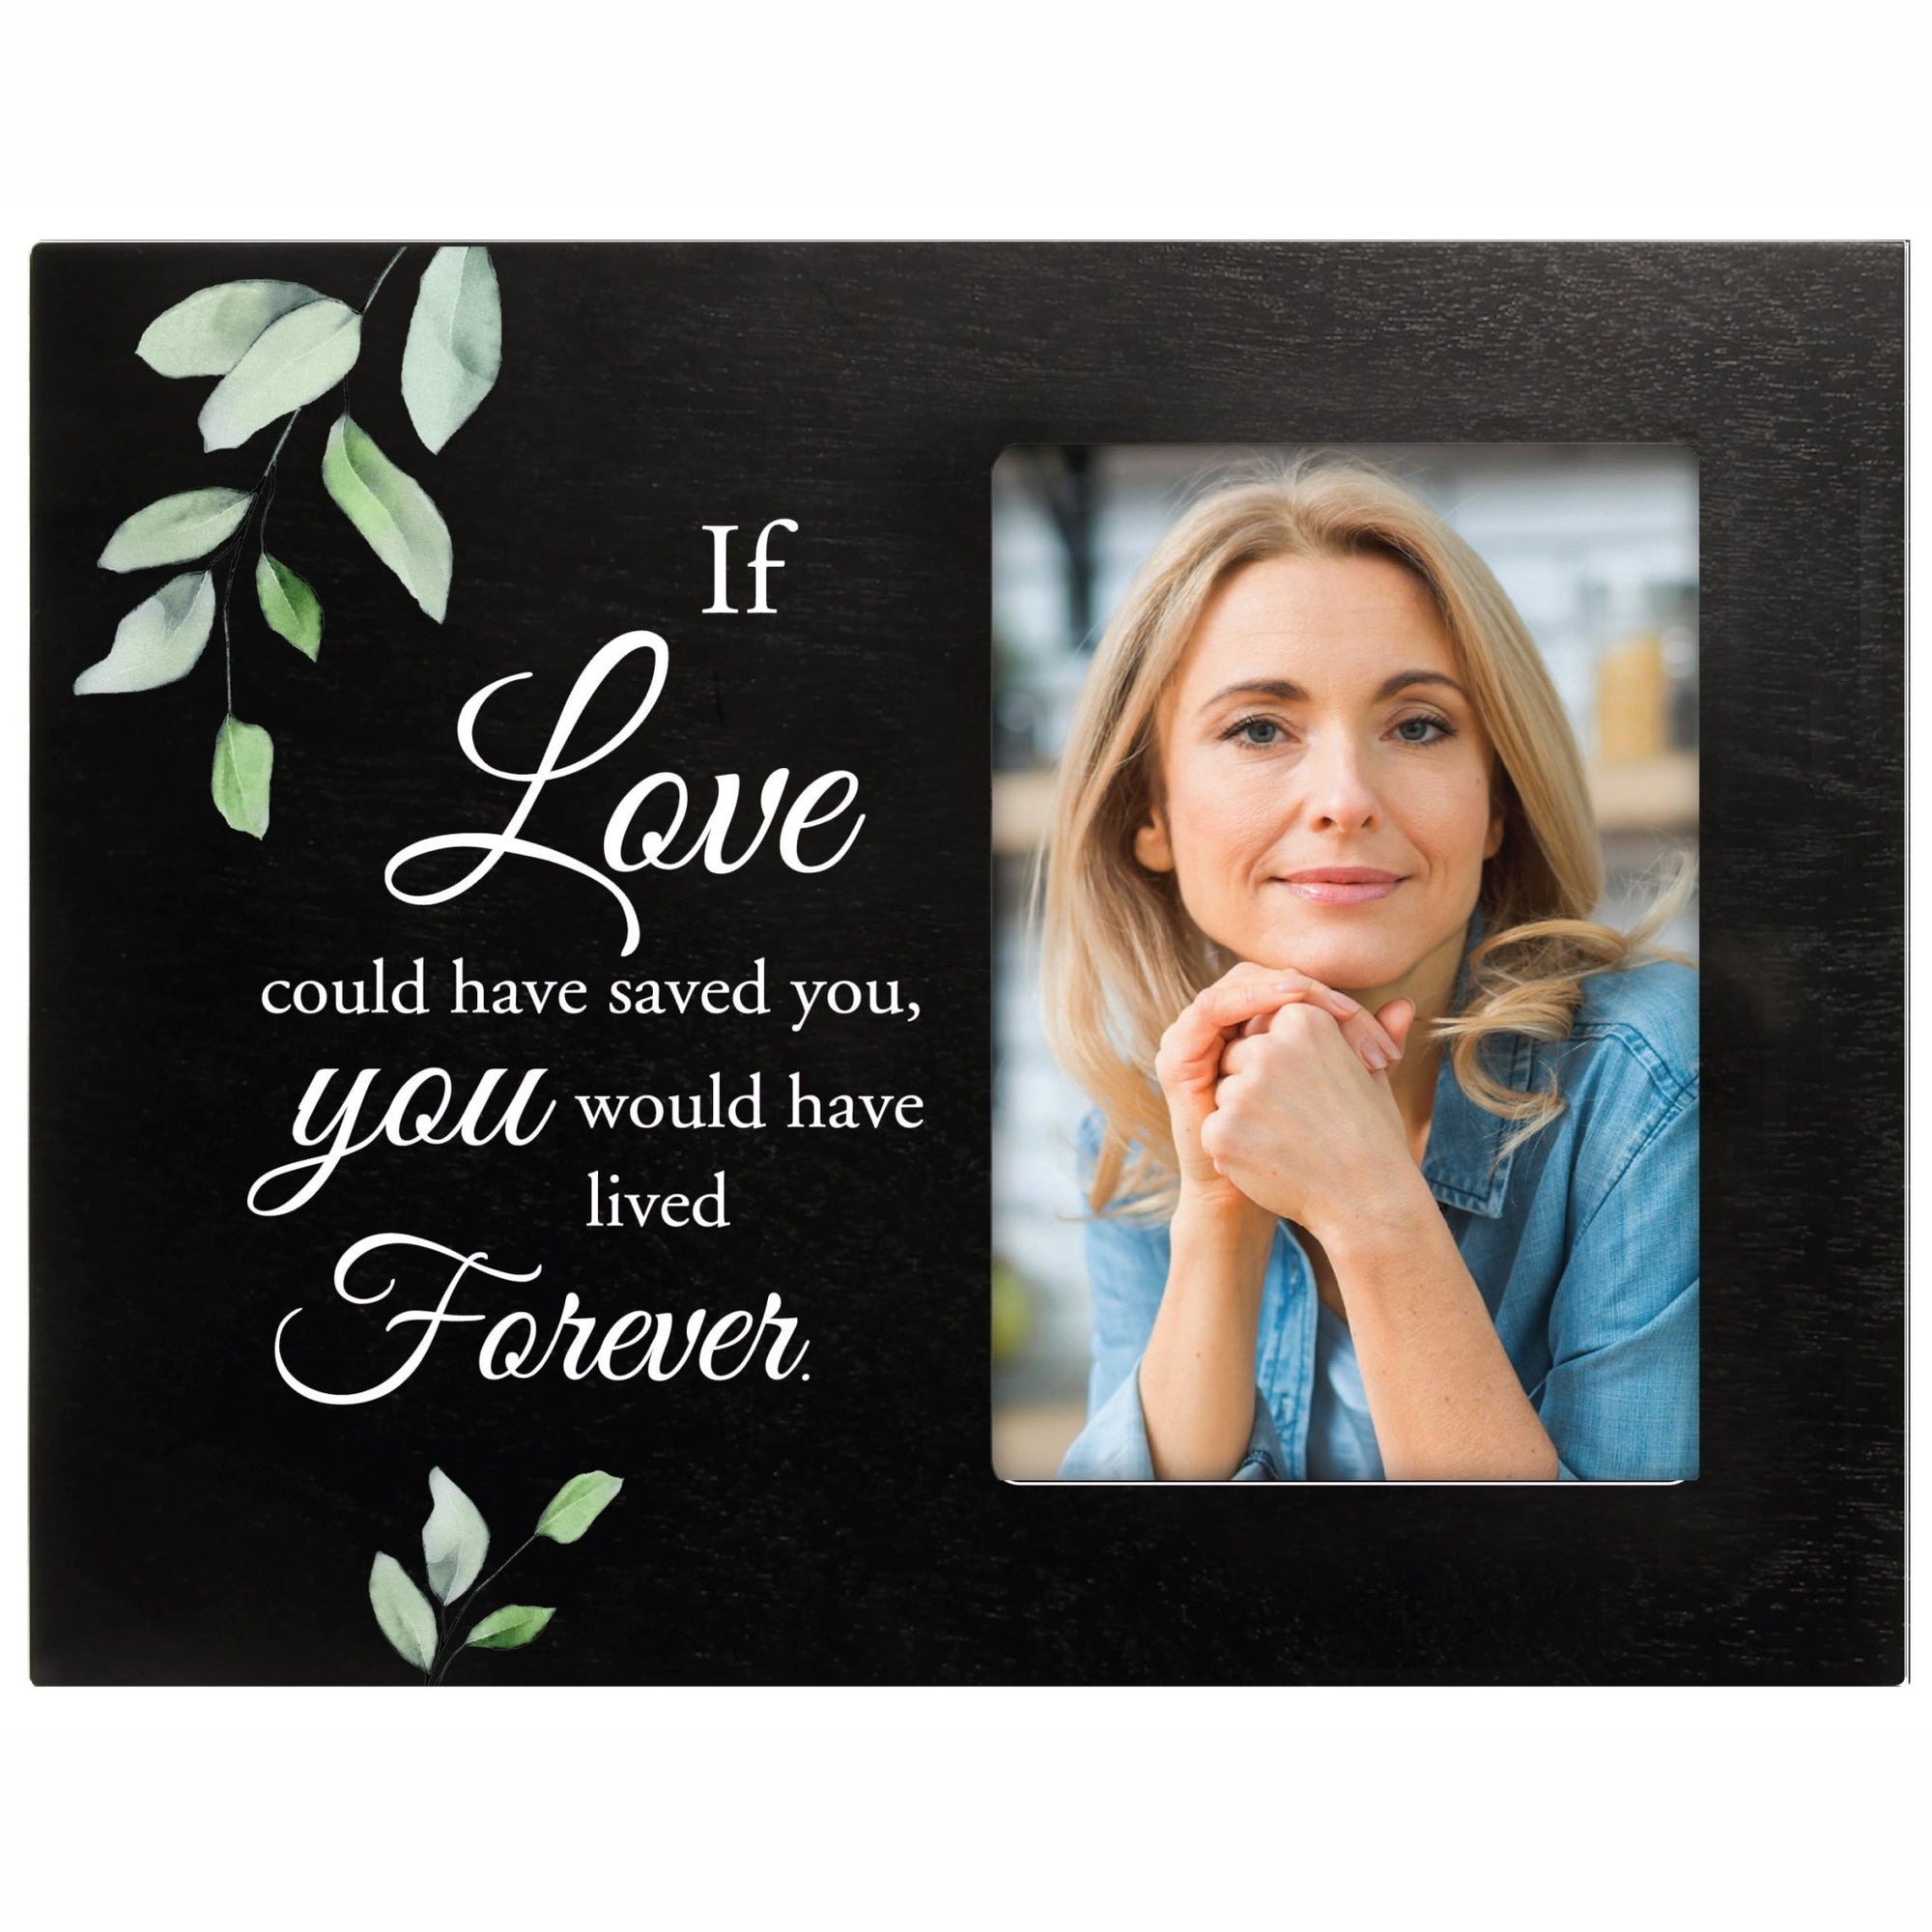 Sentimental Human Memorial Photo Frame Gift Bereavement Gift Idea - If love could have - LifeSong Milestones